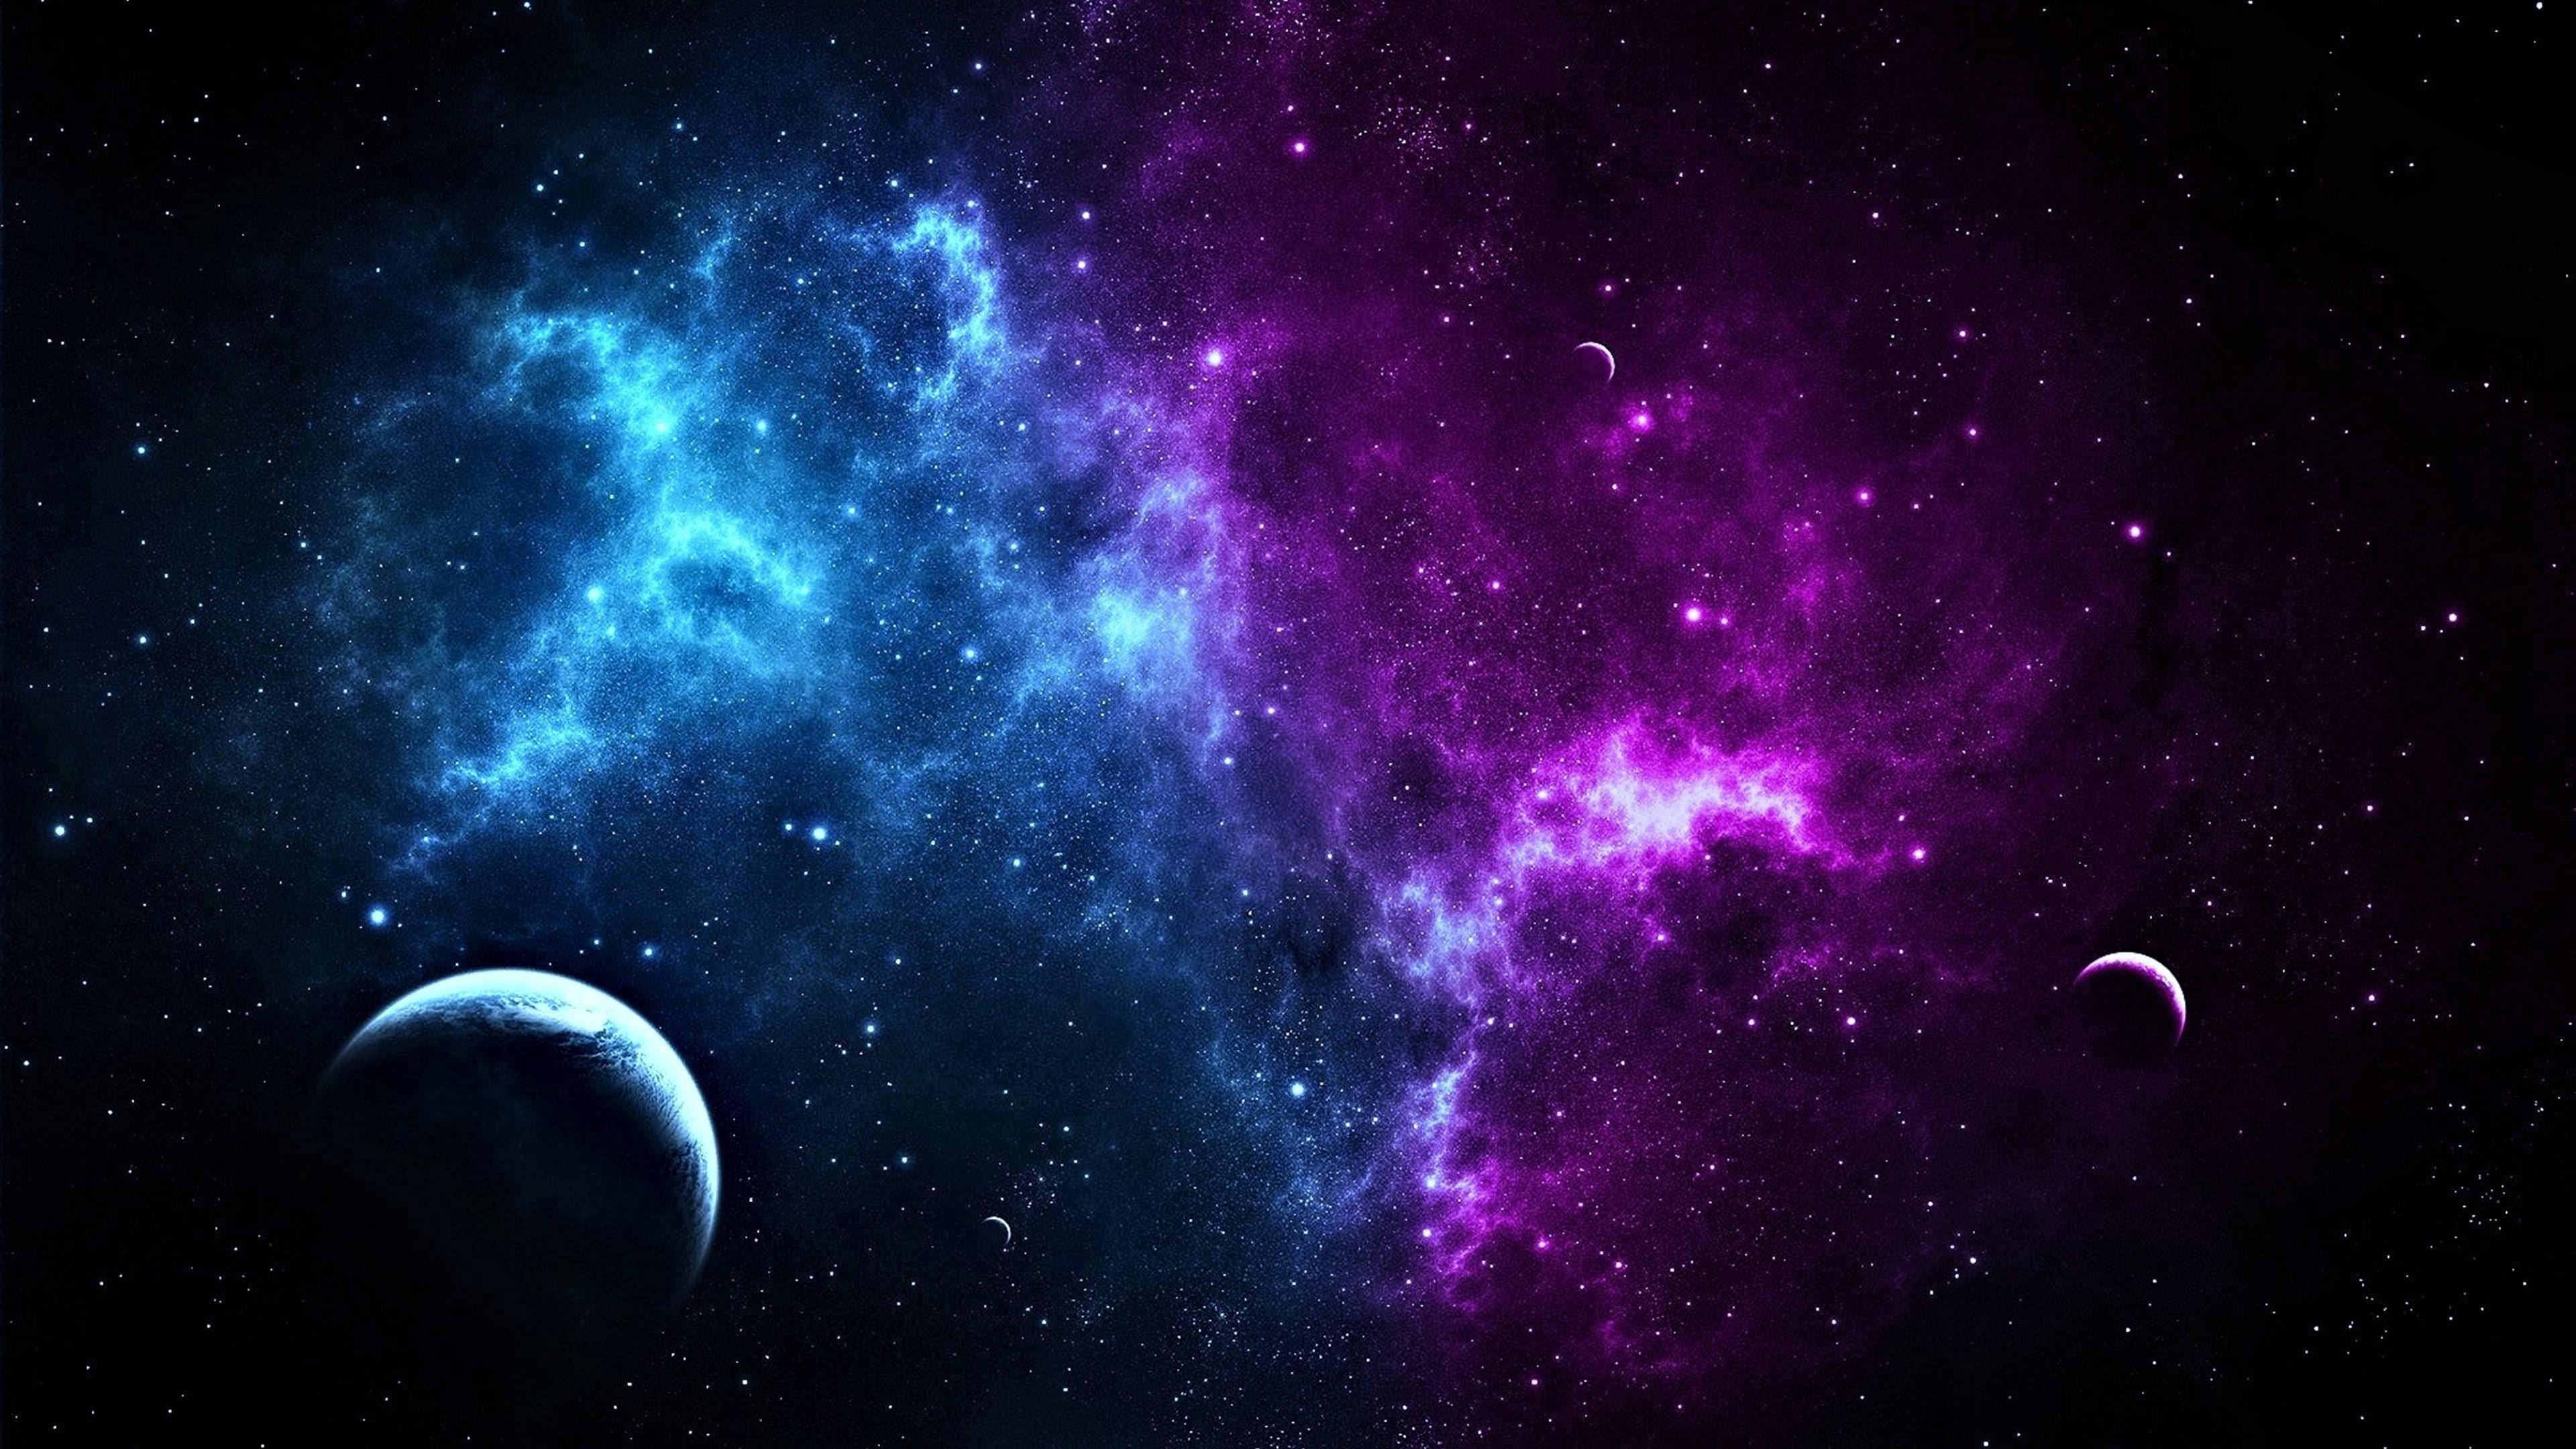 3840x2160 Download Planet Outlines In Universe Wallpaper